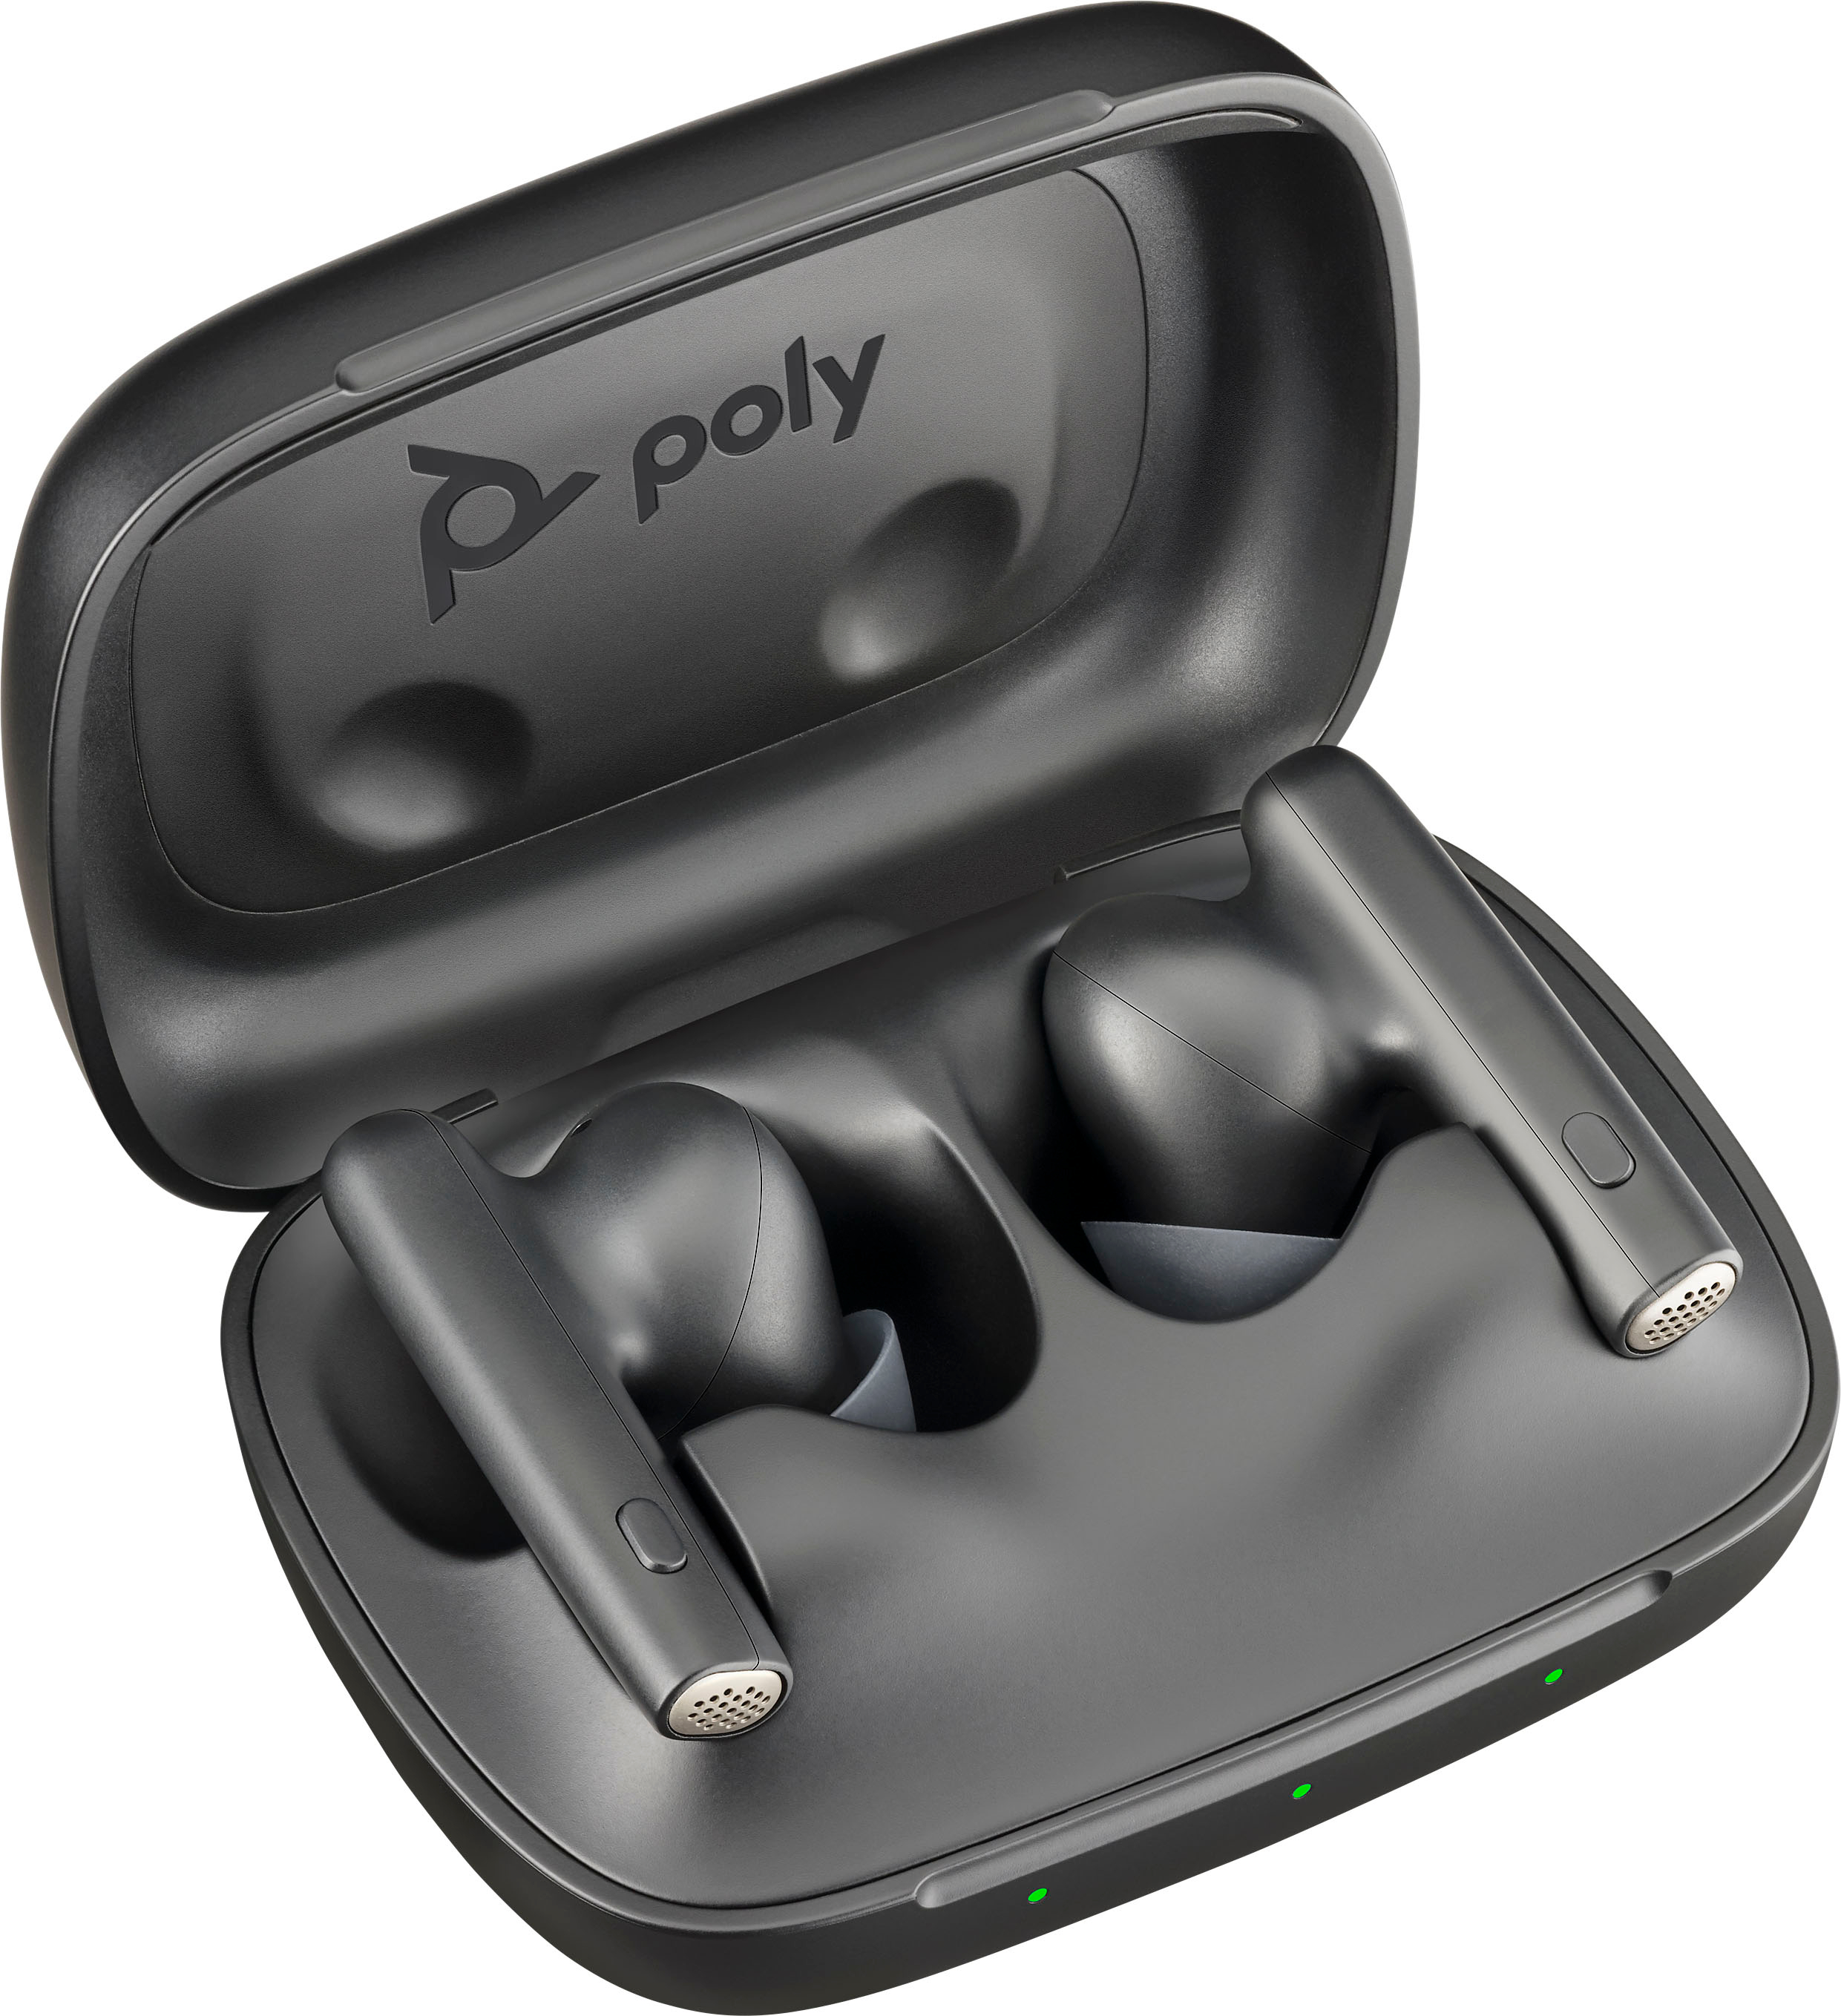 True Poly Buy 60 60 Voyager Earbuds Noise Voyager Active formerly Black Plantronics - Wireless Free Canceling Free with Best